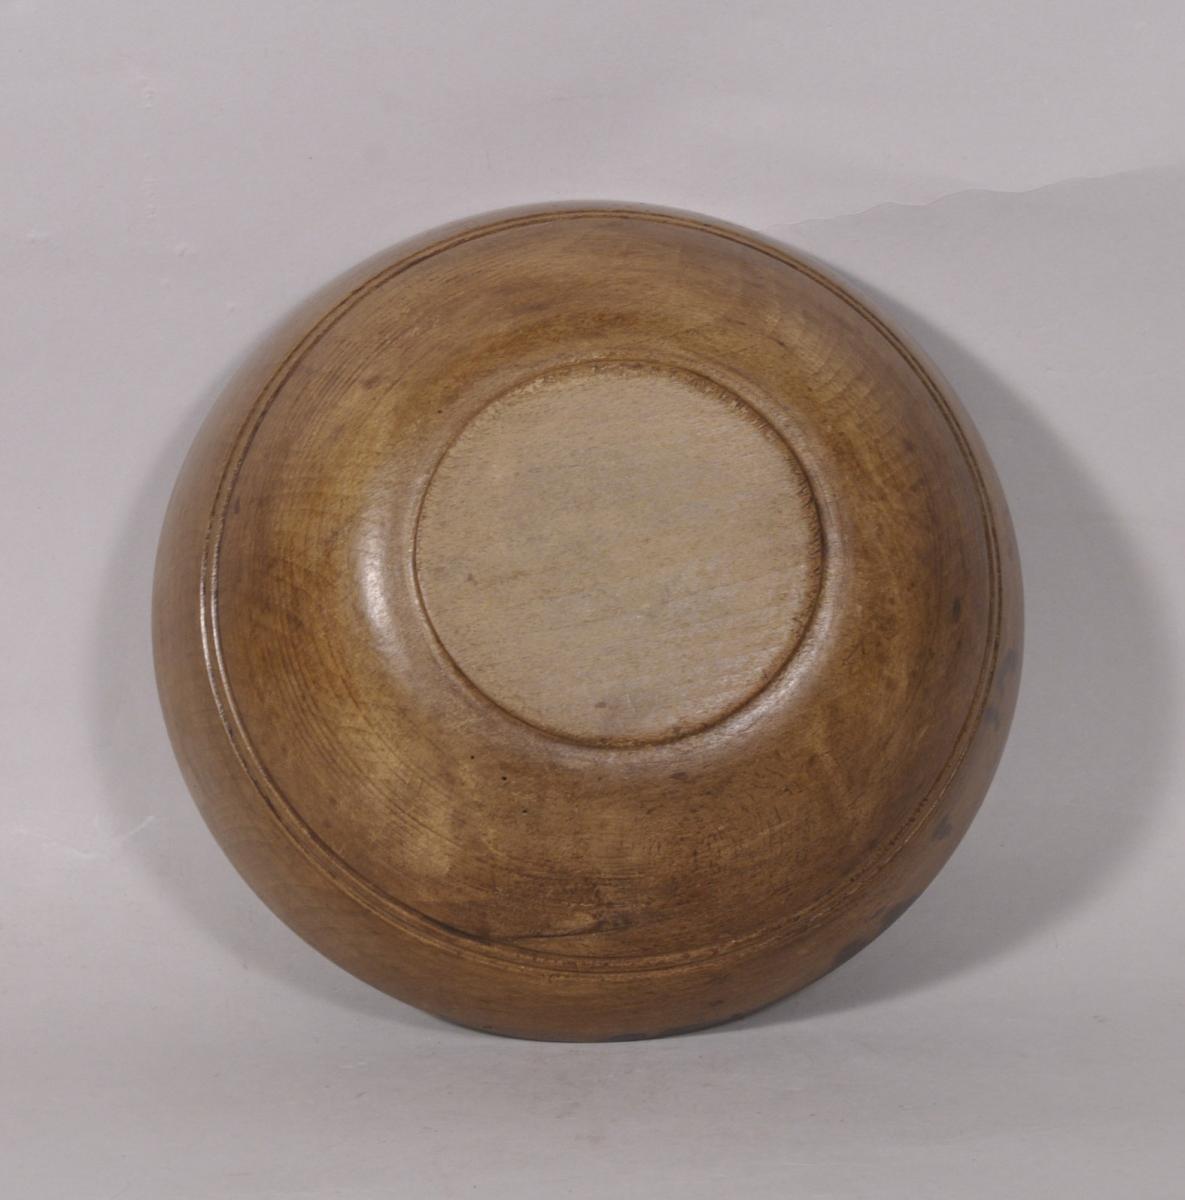 S/5579 Antique Treen 19th Century Sycamore Bowl